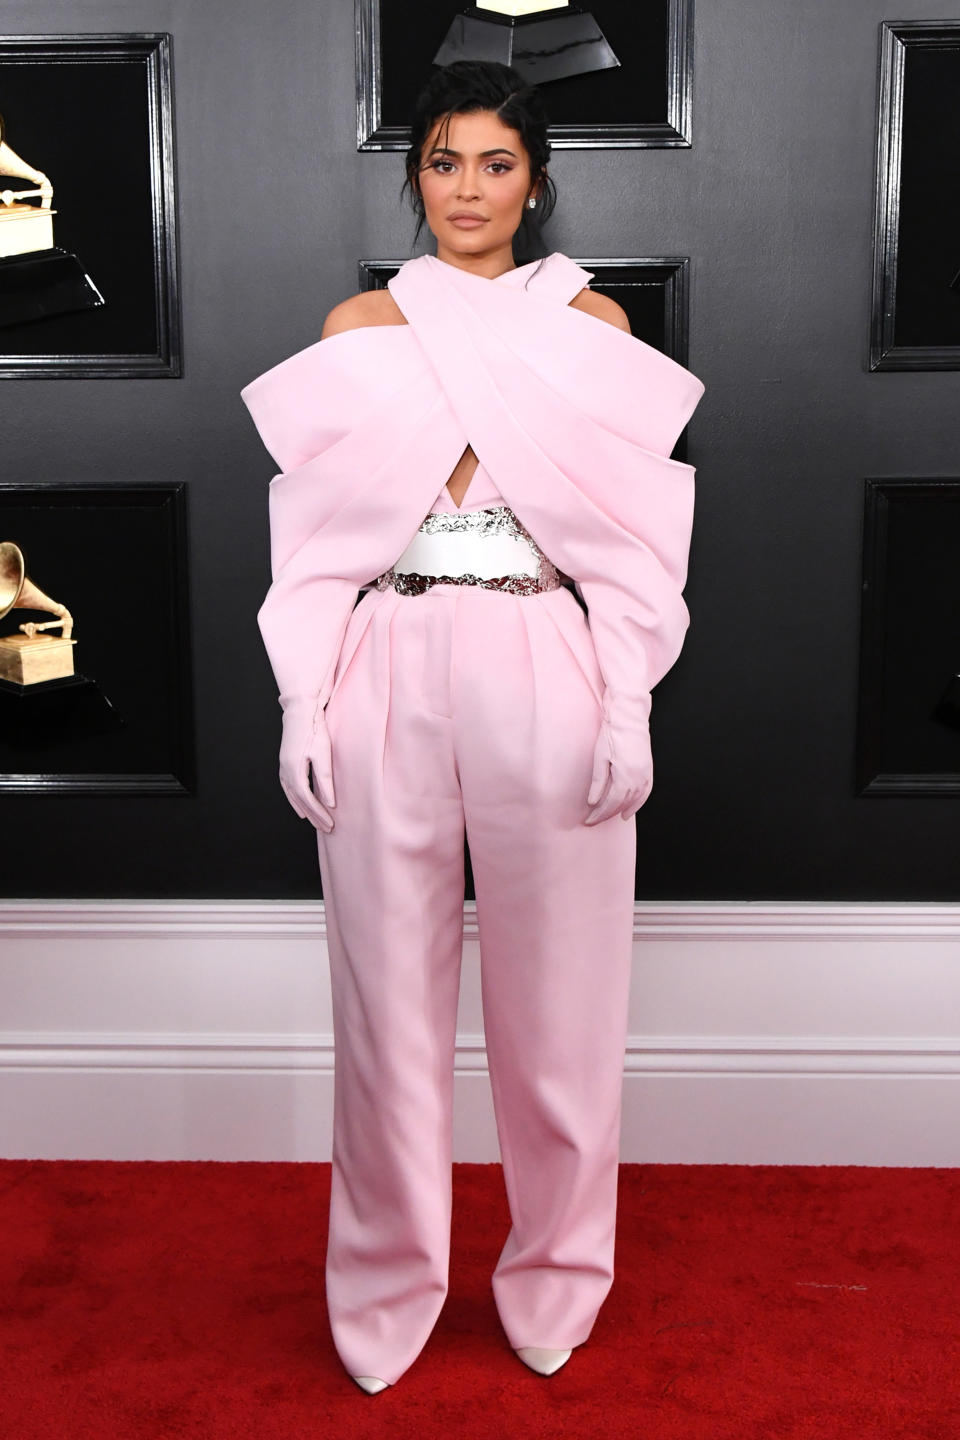 At the Grammys on Feb. 10, Kylie Jenner&rsquo;s halter top flared out into pink gloves and oversize pants. (Photo: Jon Kopaloff via Getty Images)